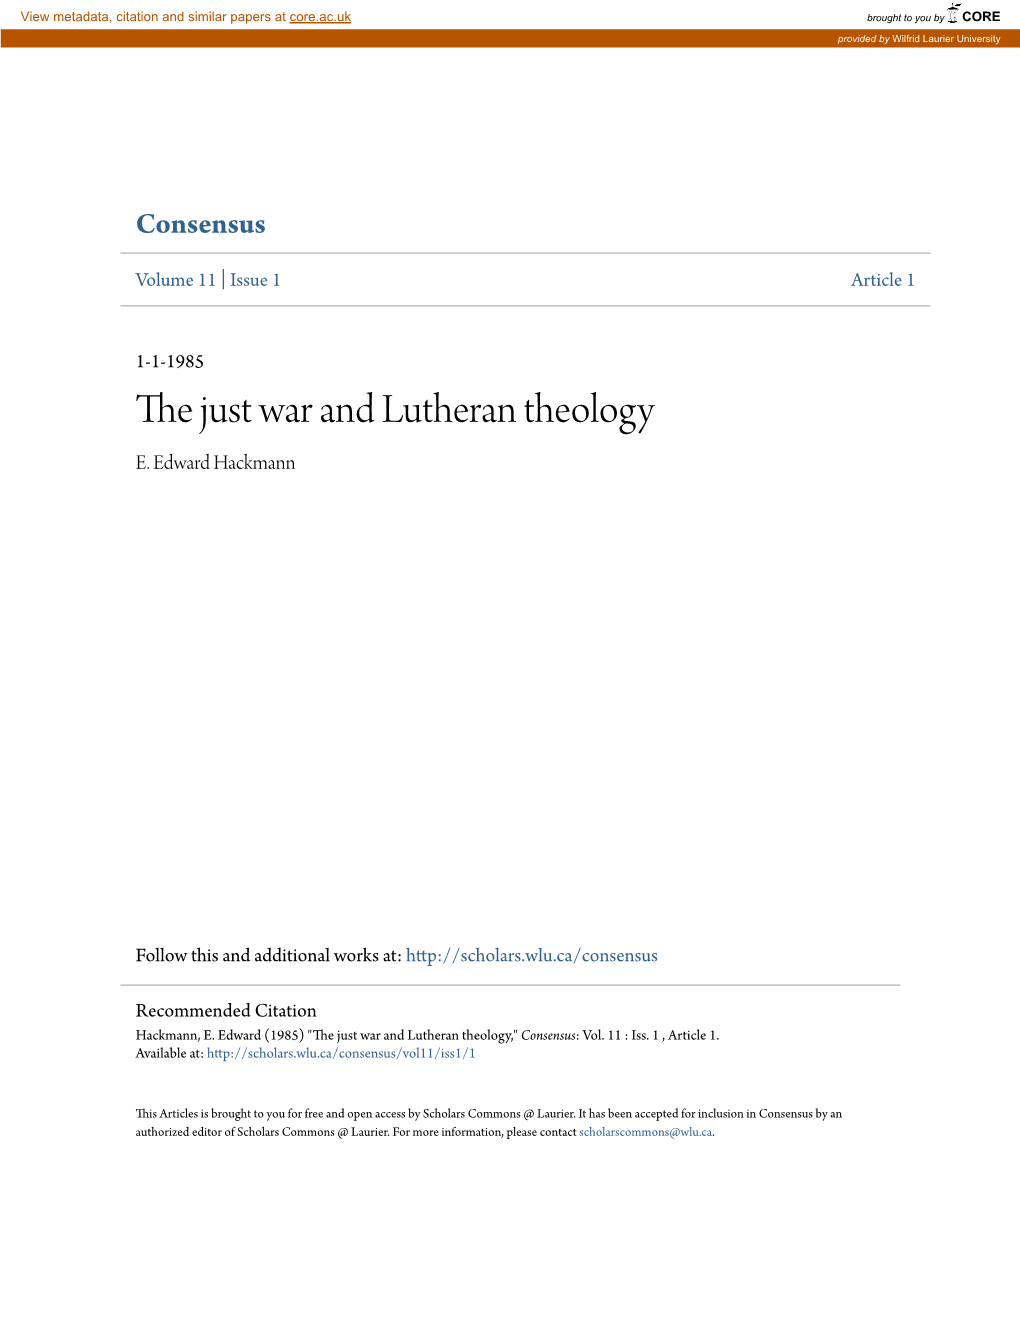 The Just War and Lutheran Theology E